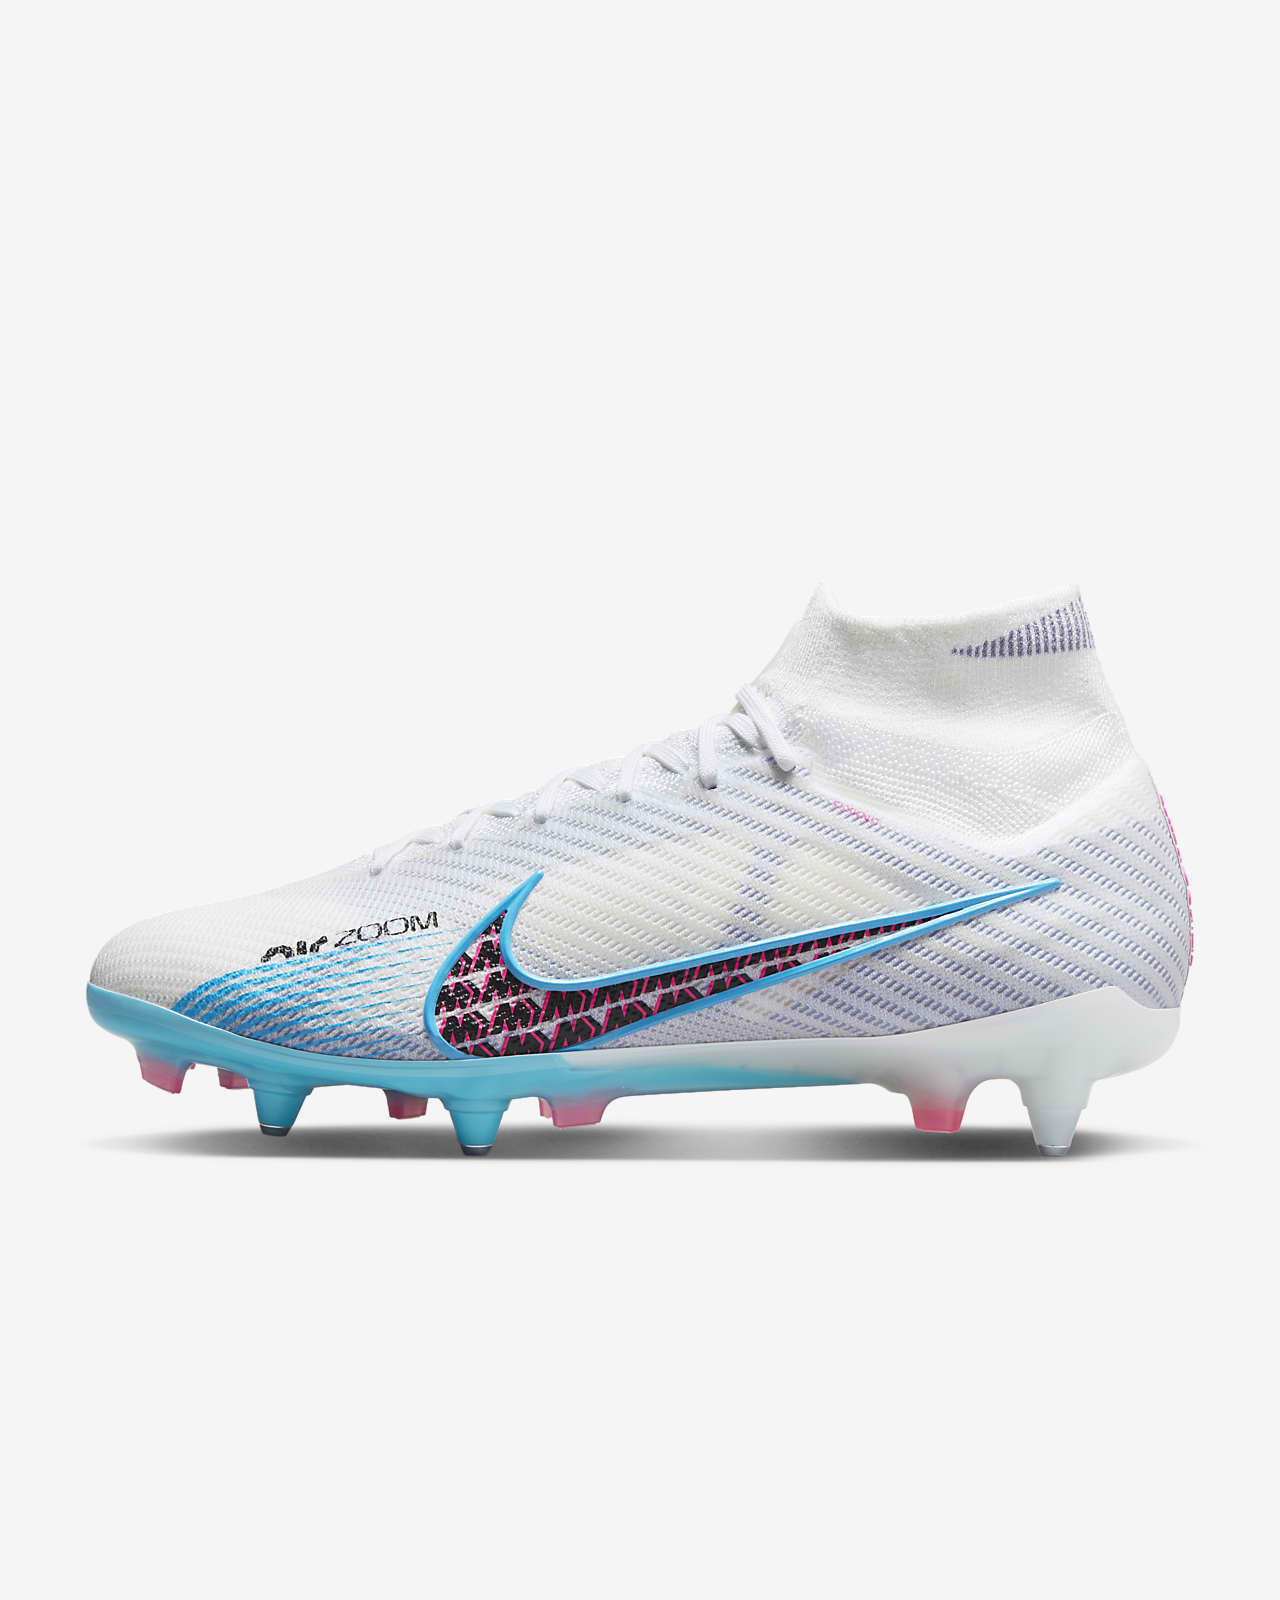 Nike Zoom Mercurial Superfly 9 Elite SG-Pro Anti-Clog Traction Soft-Ground Football Boot. AU